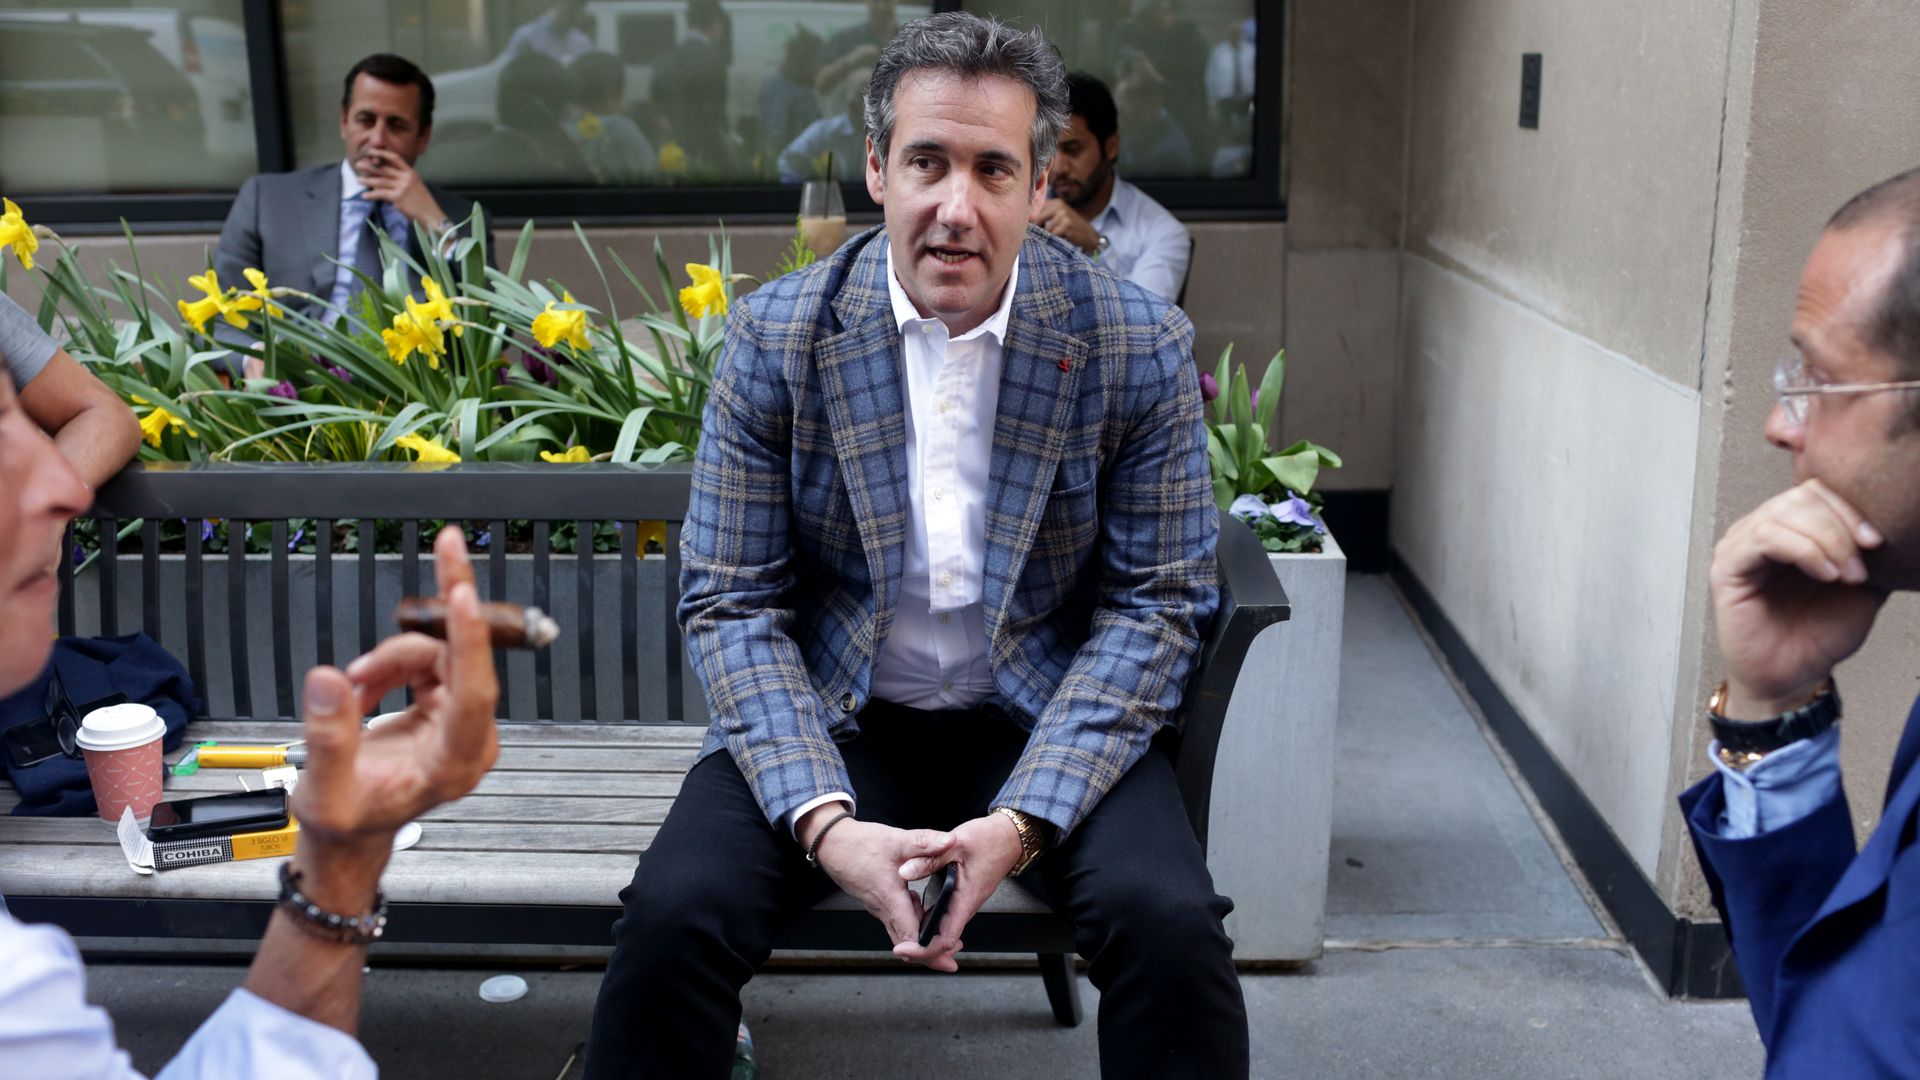 Michael Cohen sitting on a bench, talking